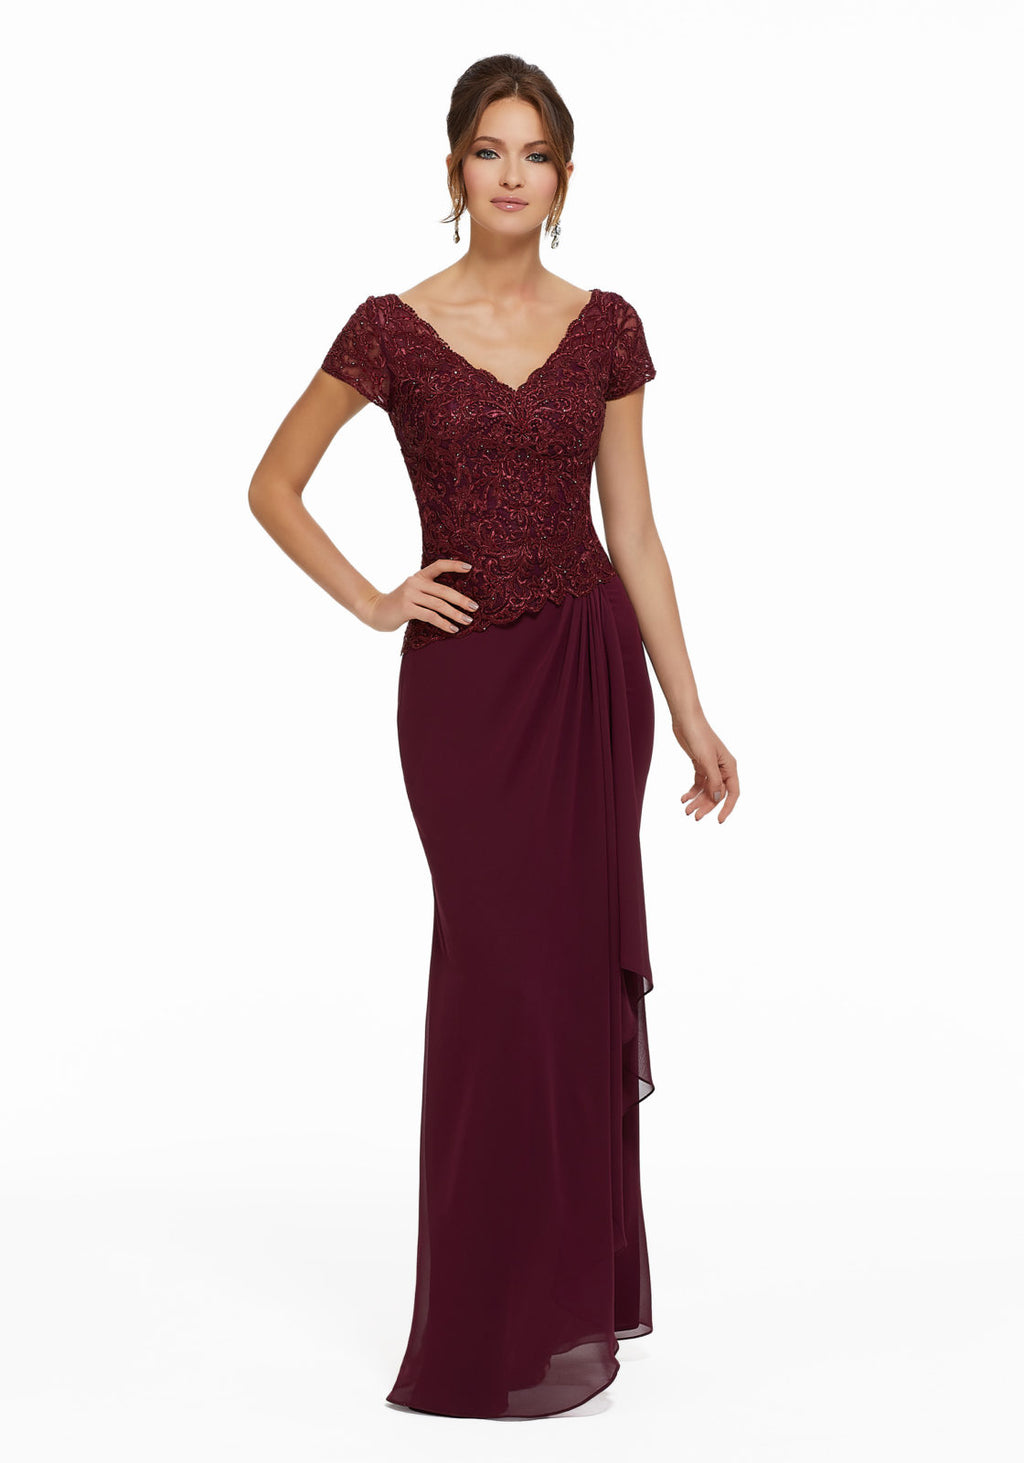 Chiffon evening gown featuring beaded lace appliques on a net bodice with short sleeves. Sheath silhouette with cascading detail on skirt.  Sizes: 2-24  Available in Wine, Navy  If we do not have your desired size or color in stock please call or email us for availability!